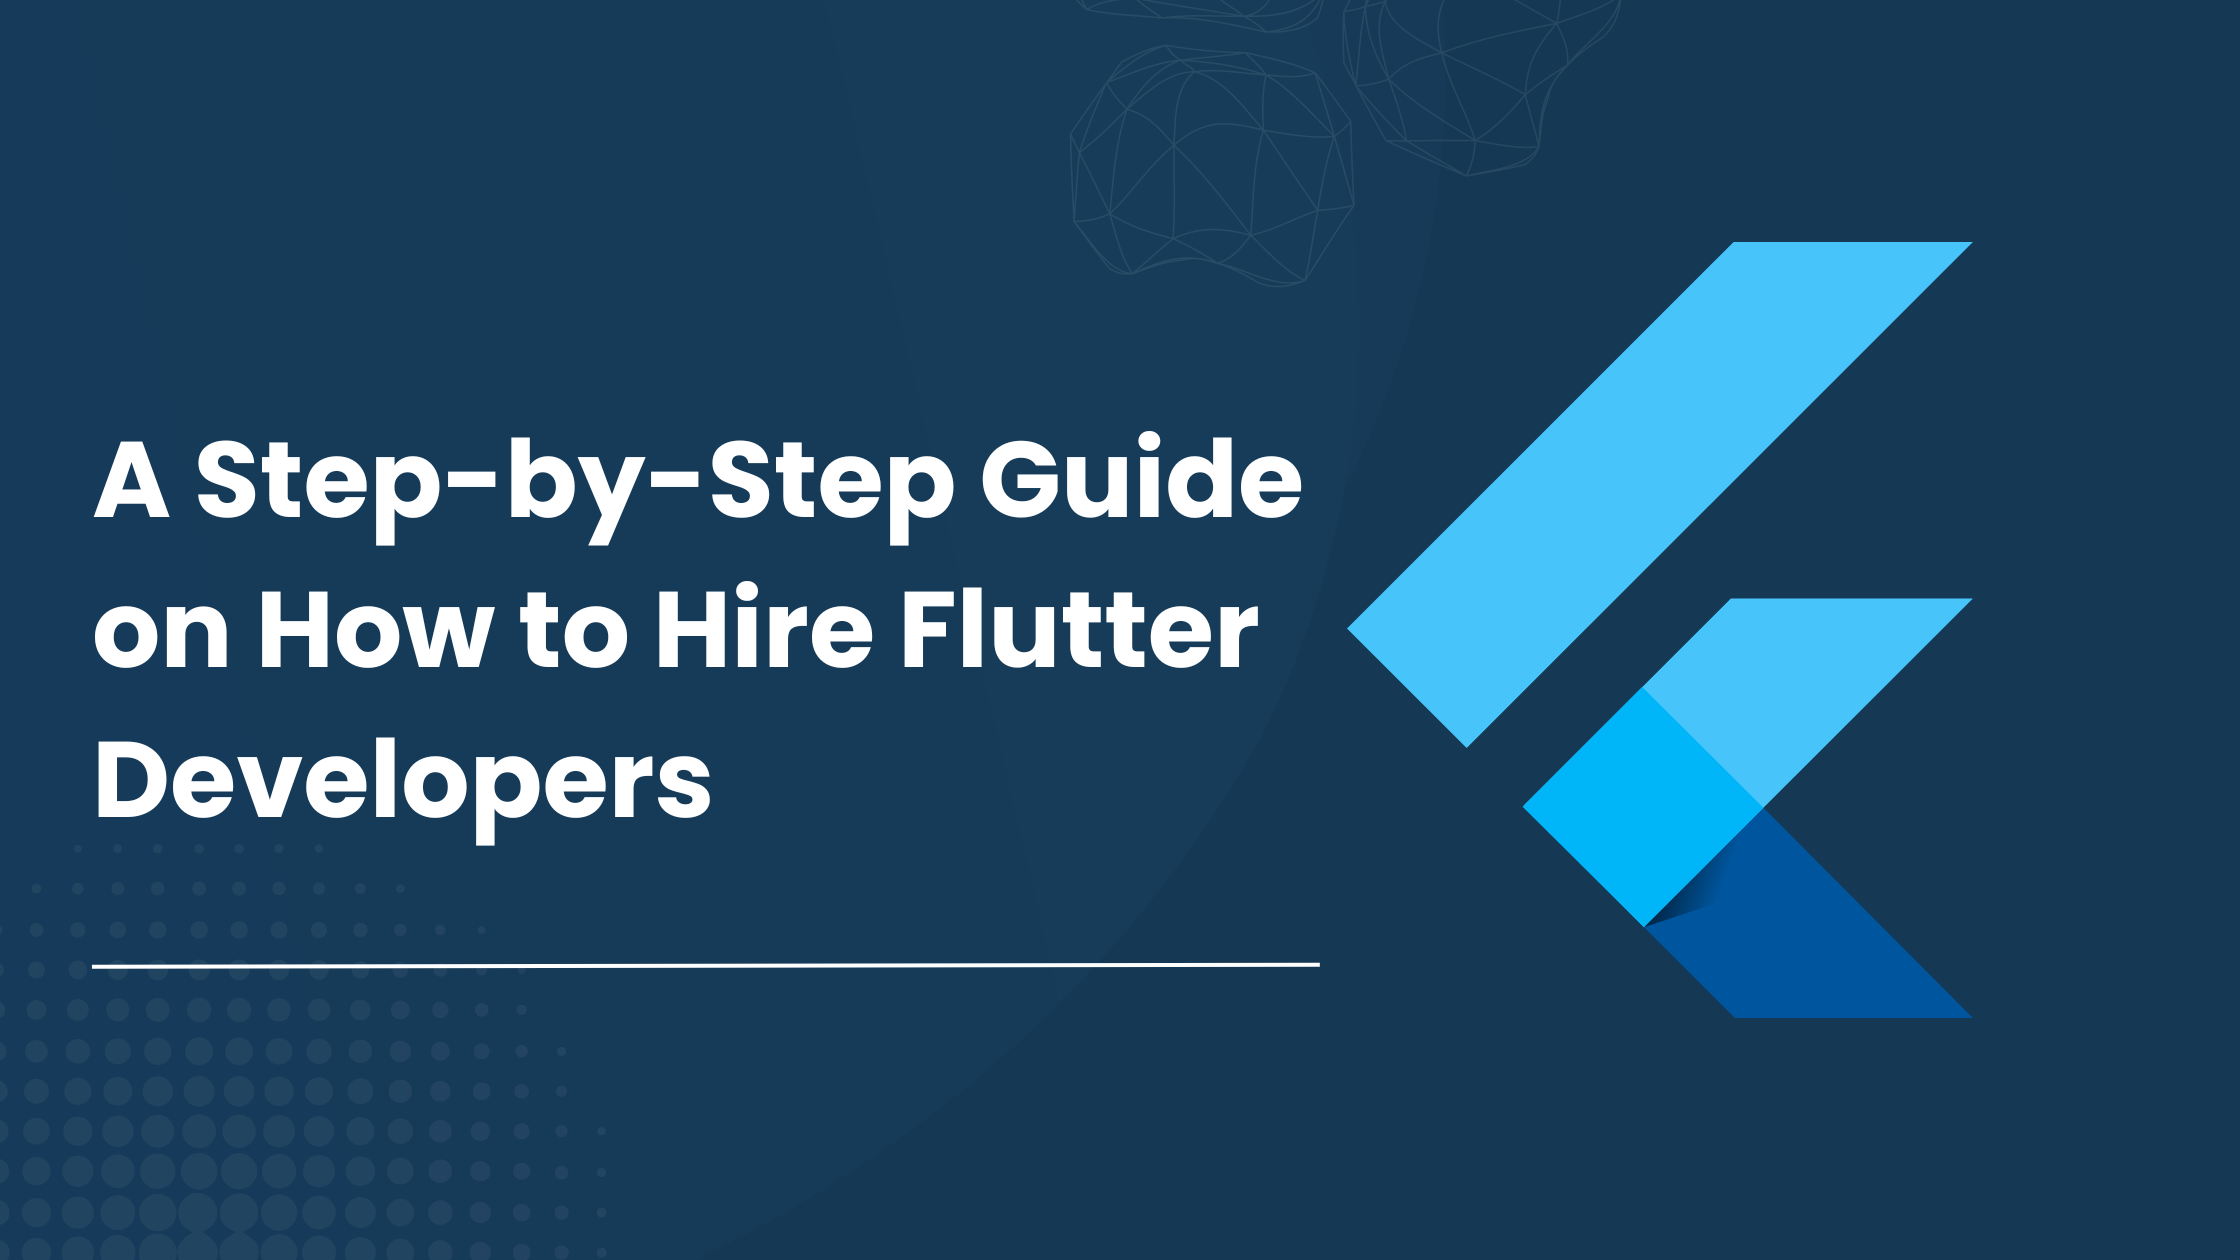 A Step-by-Step Guide on How to Hire Flutter Developers